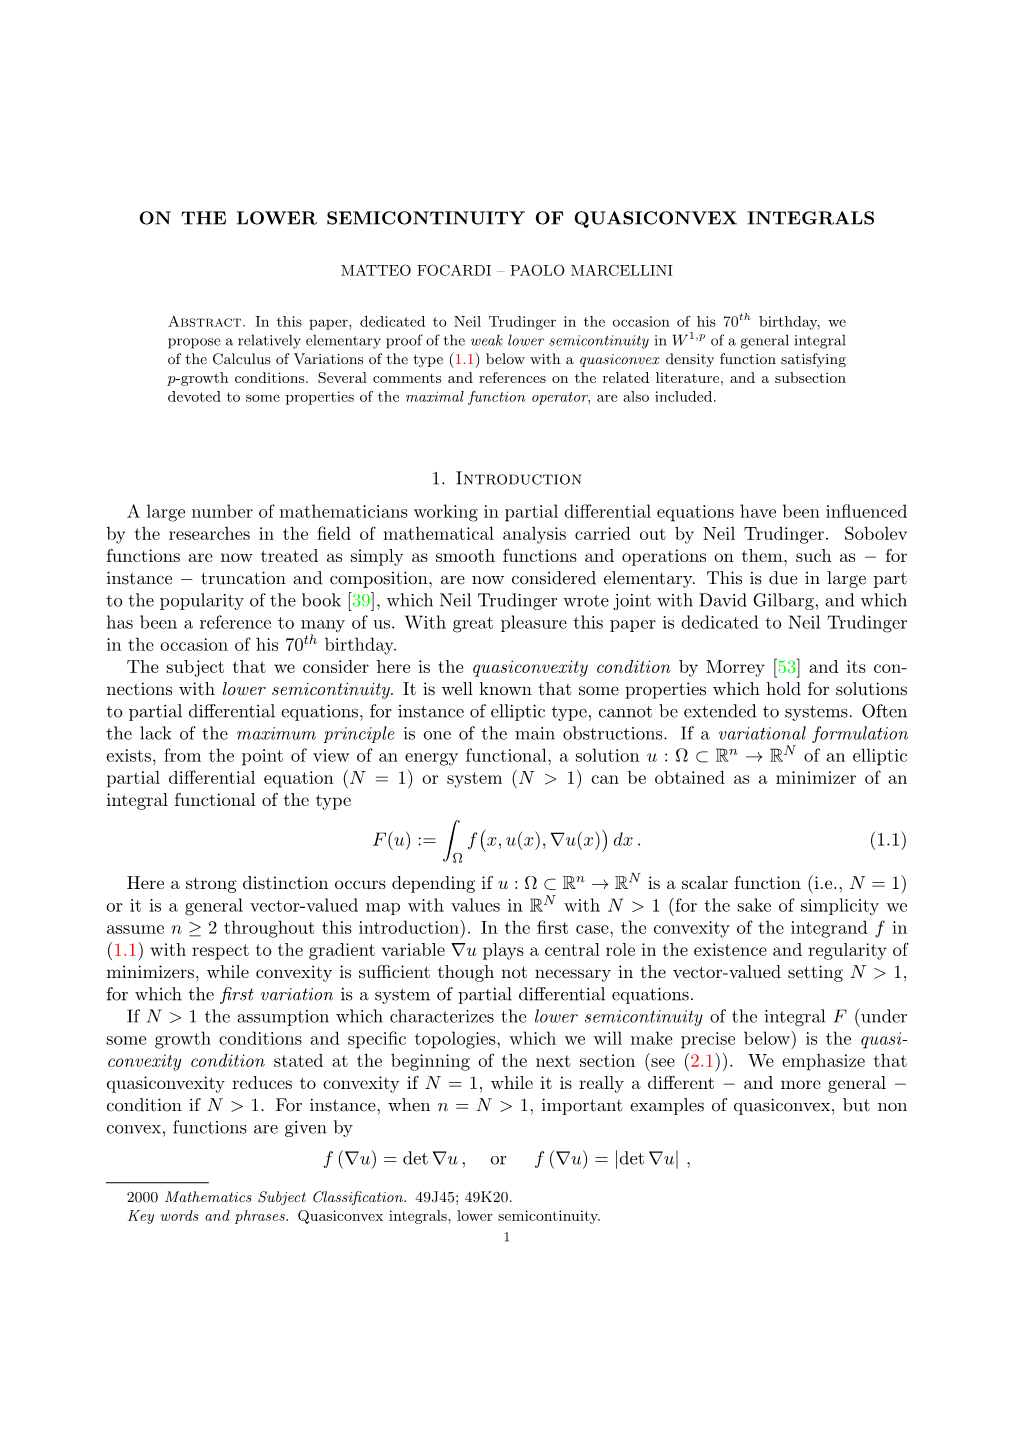 ON the LOWER SEMICONTINUITY of QUASICONVEX INTEGRALS 1. Introduction a Large Number of Mathematicians Working in Partial Differe